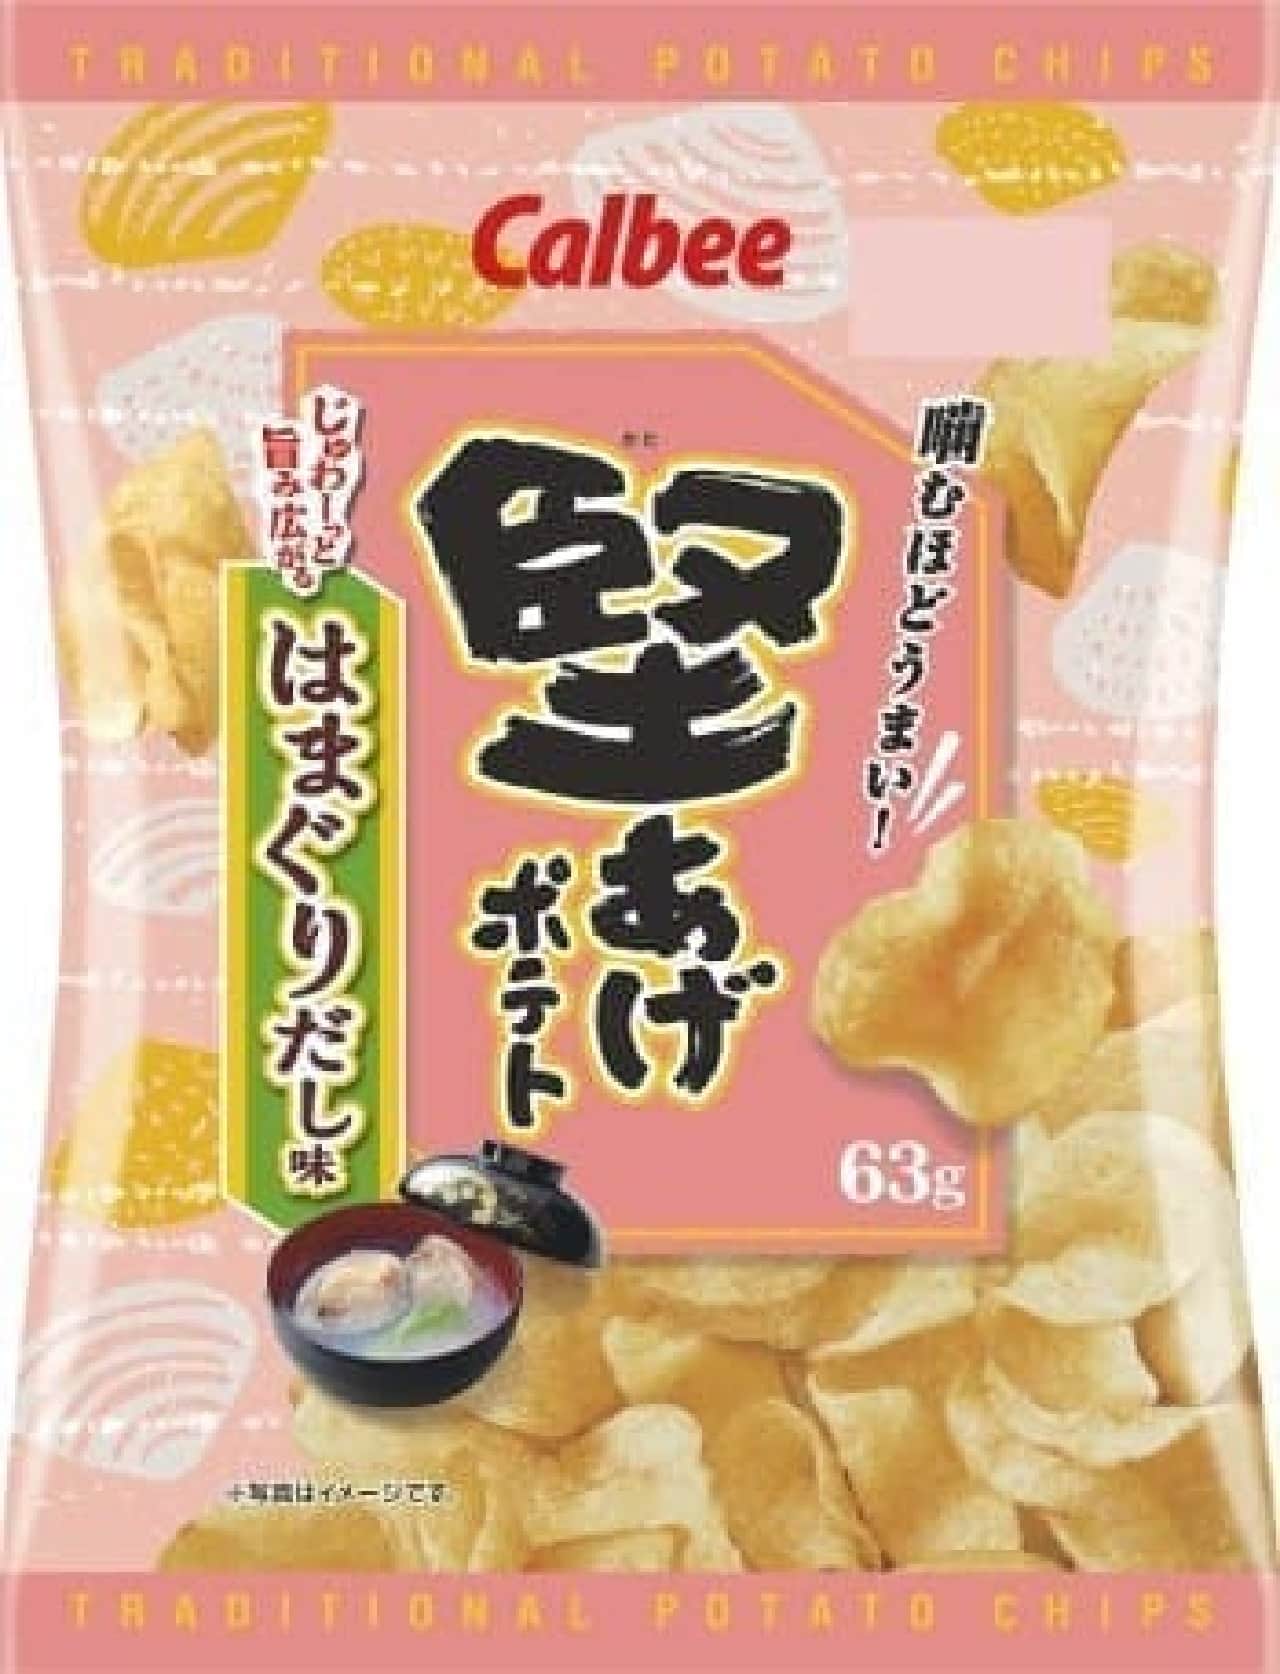 Calbee "Tightened potatoes with clam soup stock"